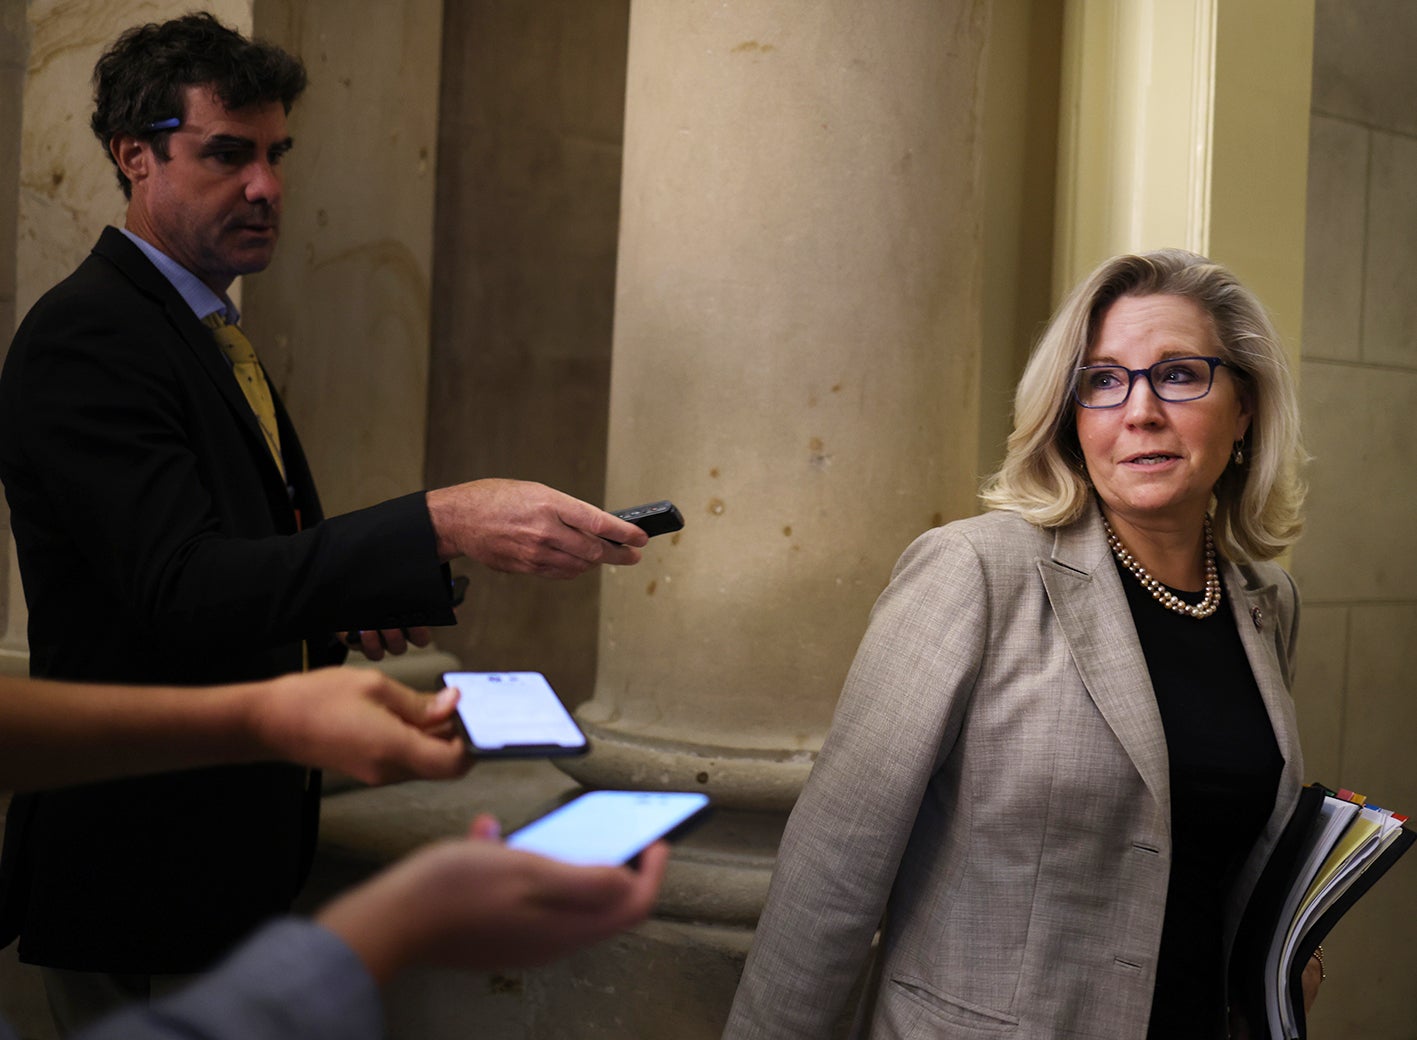 Liz Cheney can be a villainous Republican and an honourable human being at the same time